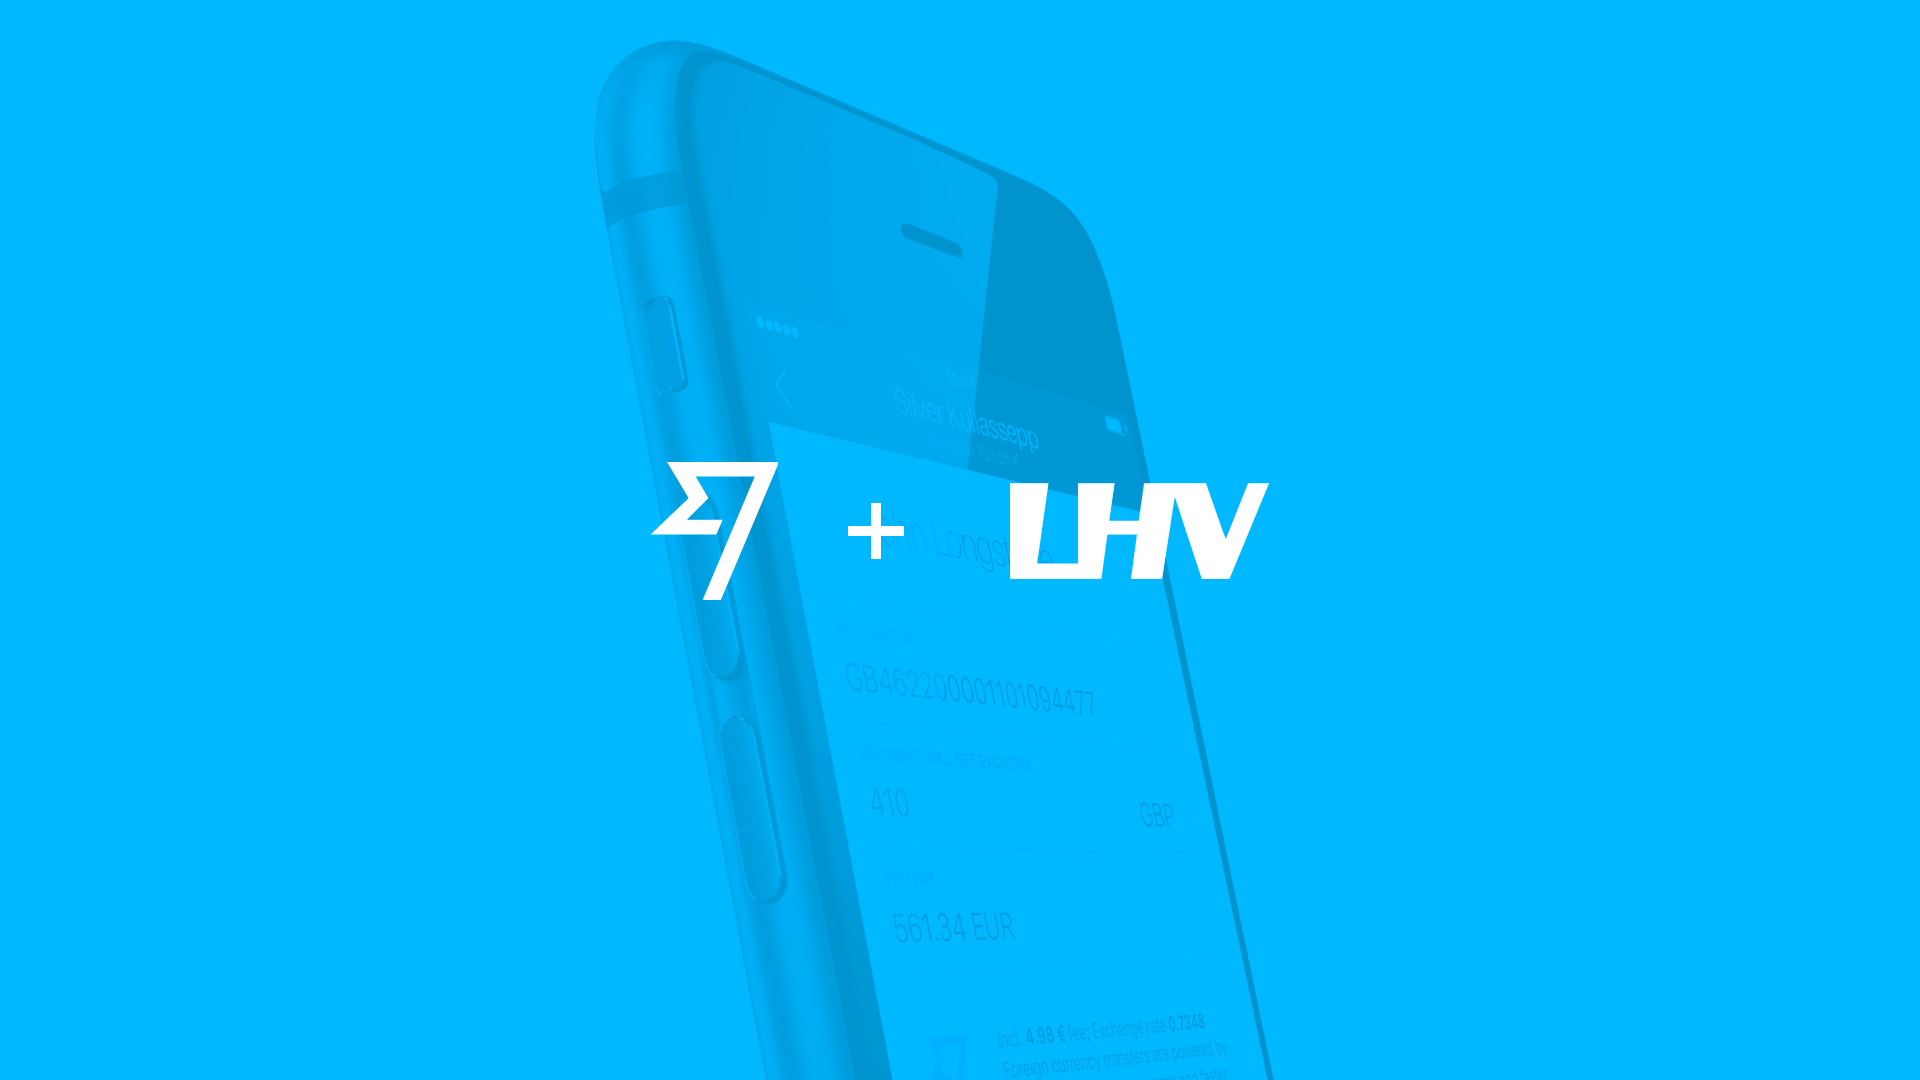 Implementing Transferwise payment into LHV mobile apps